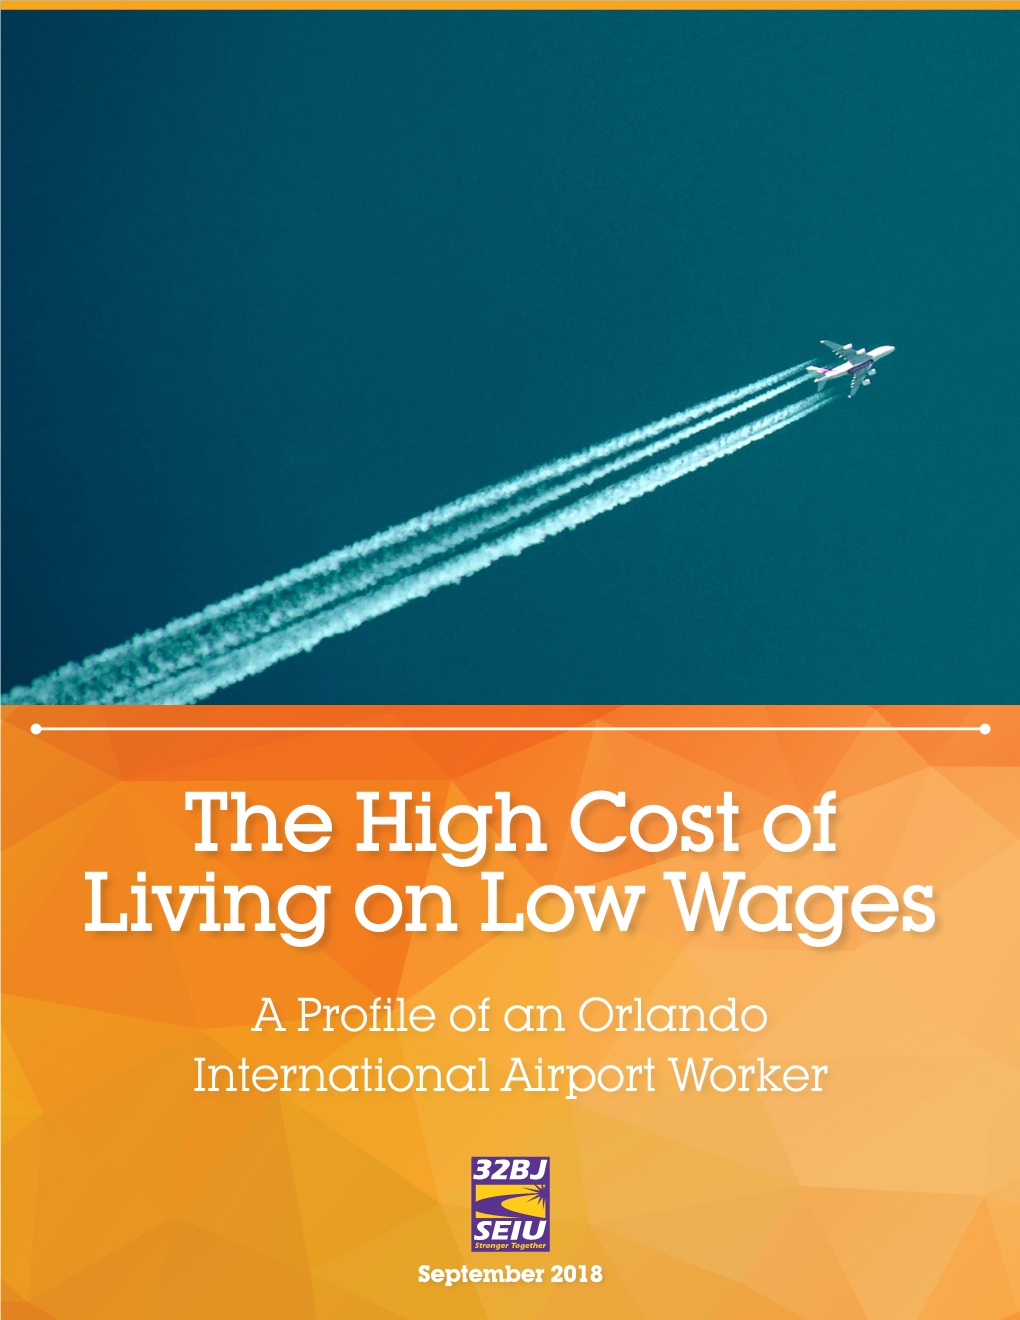 The High Cost of Living on Low Wages a Profile of an Orlando International Airport Worker